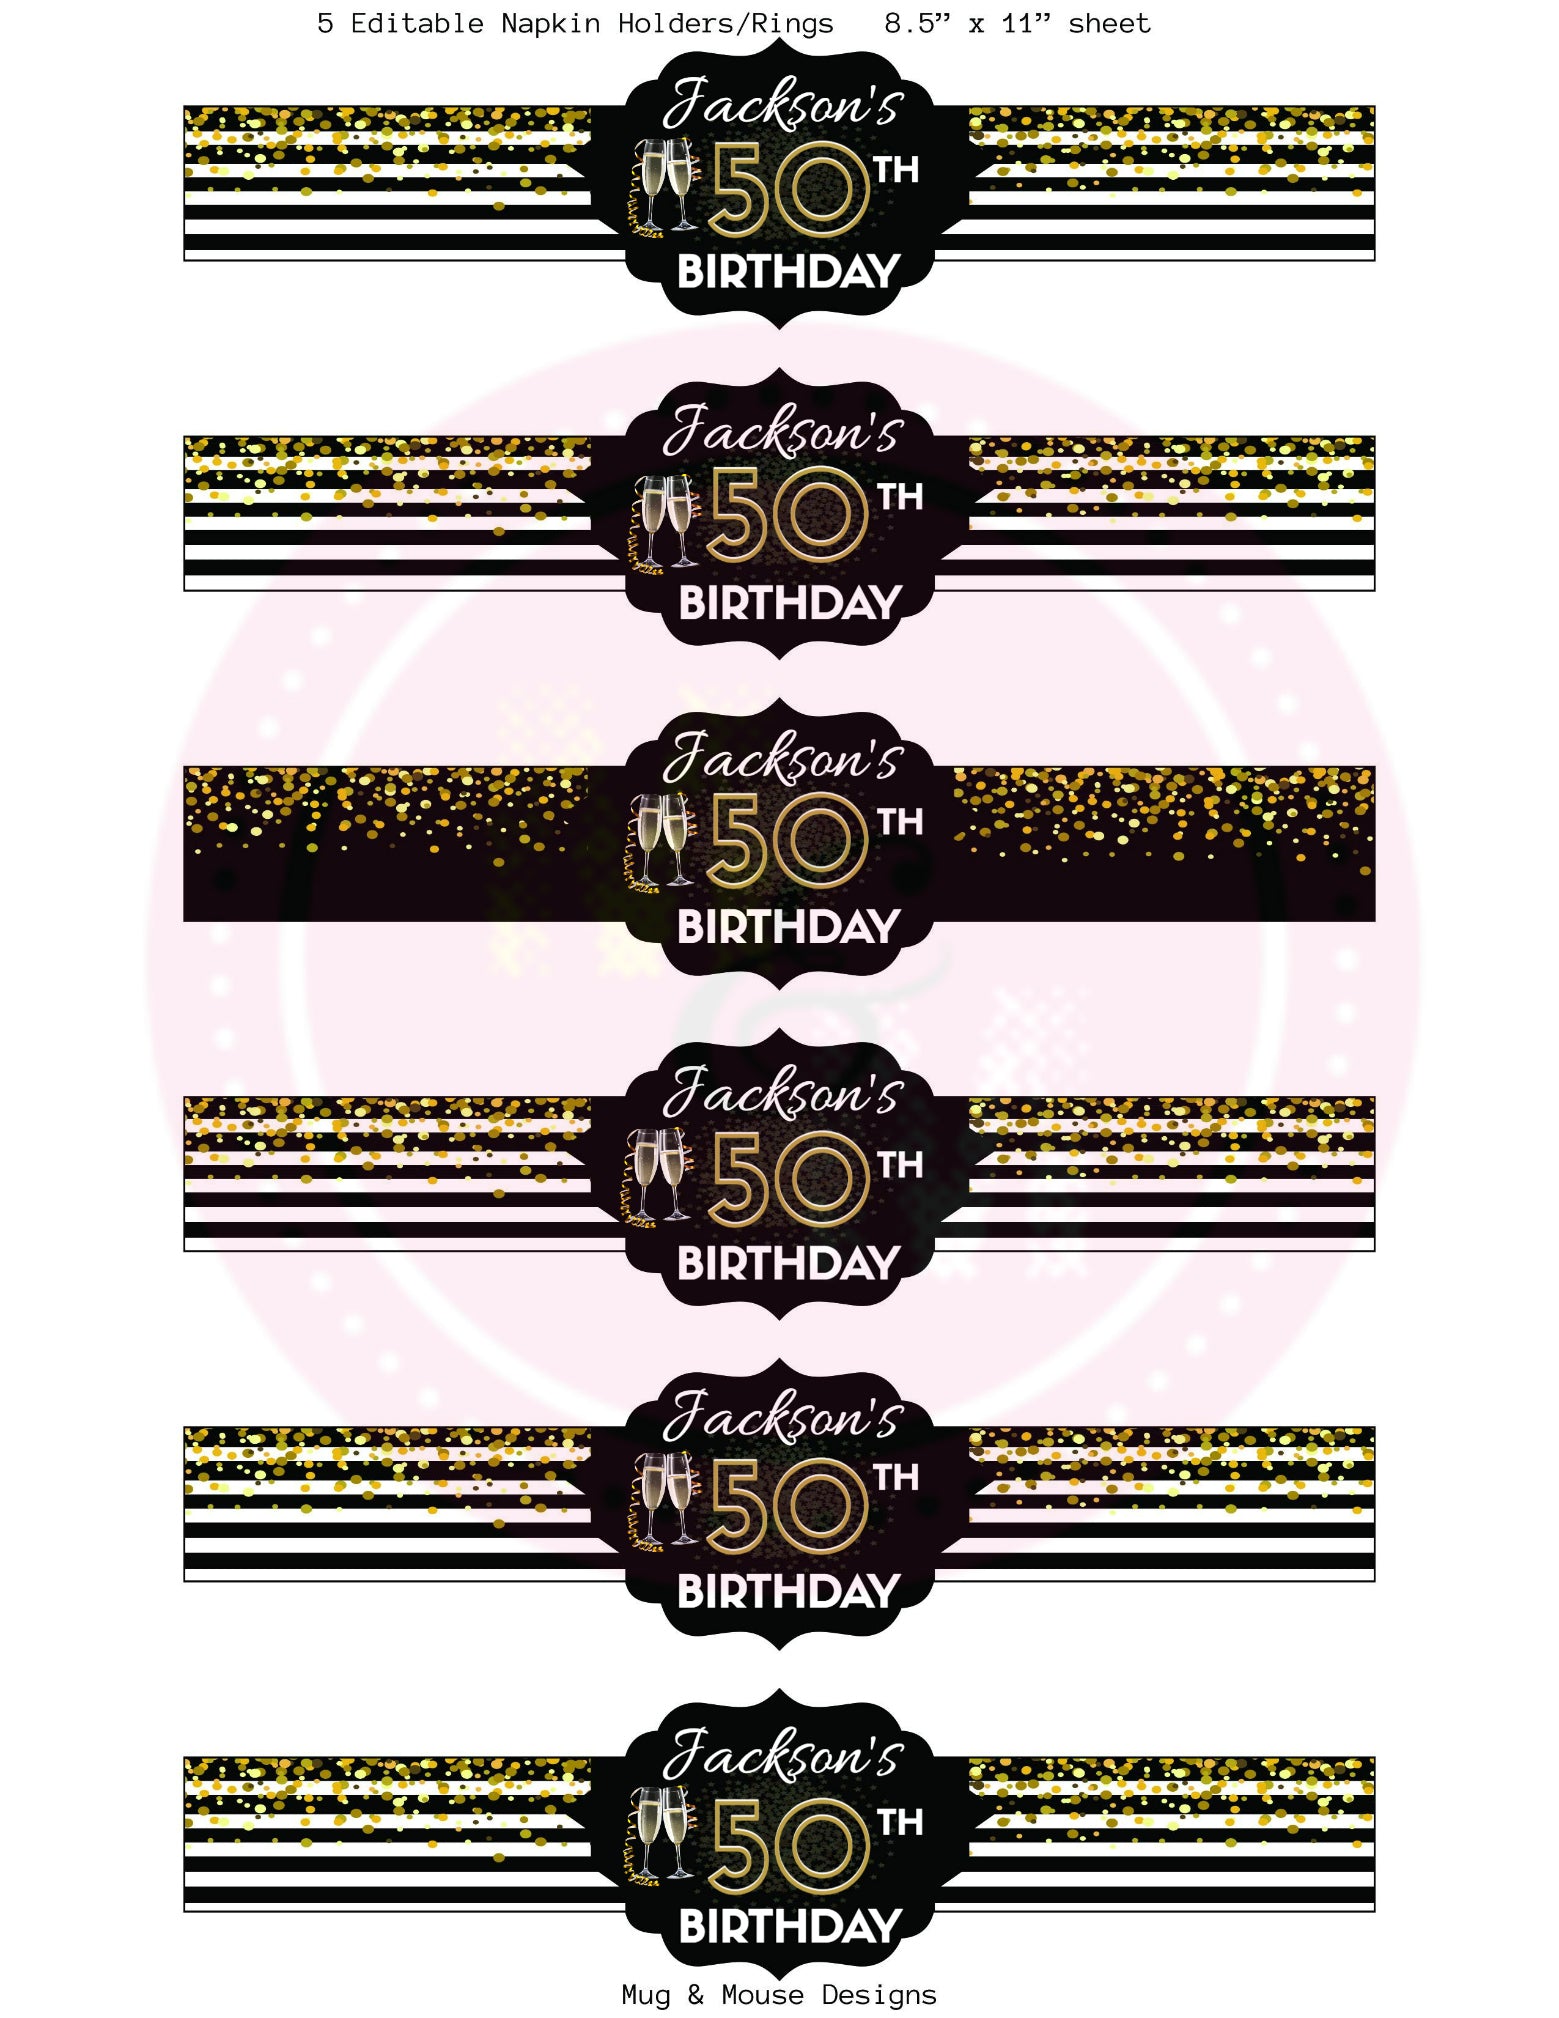 Editable Black, White and Gold Birthday Party Napkin Holder Labels, Black, White & Gold Birthday Party Napkin Rings,  Black and White Party - mugandmousedesigns